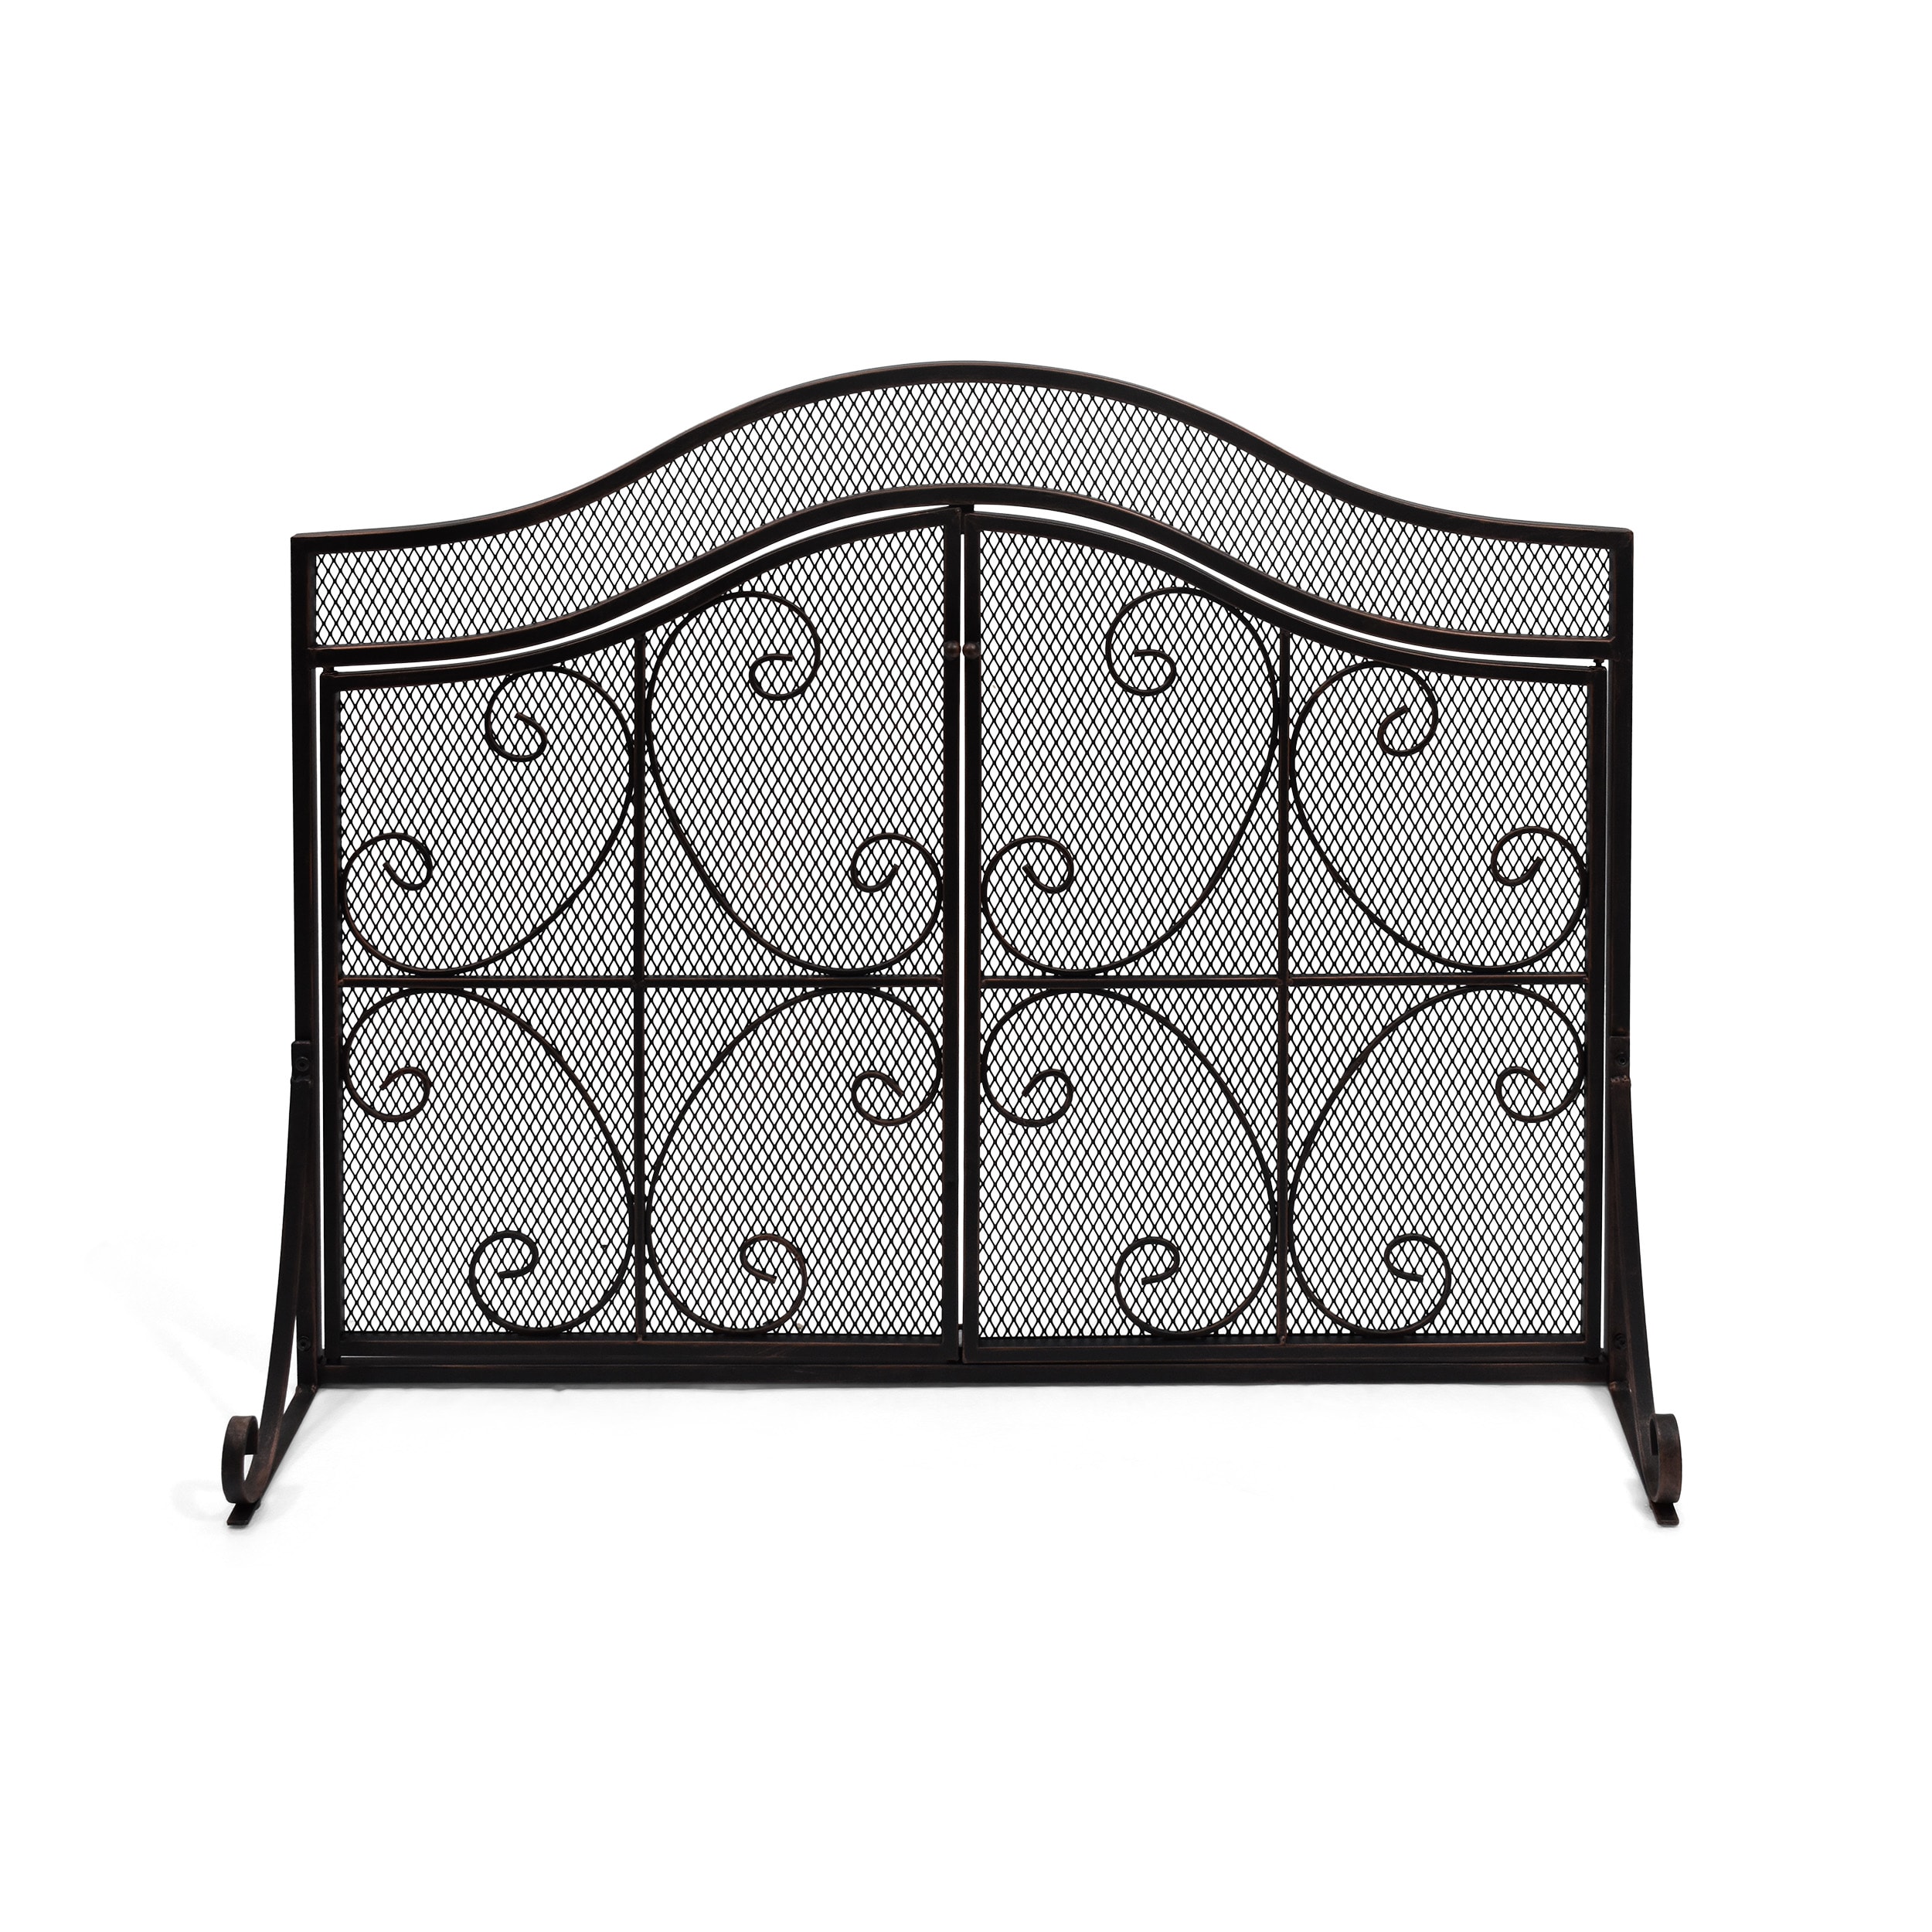 Pendleton Modern Three Panel Iron Firescreen with Door, Black Copper Finish | - Best Selling Home Decor 309133